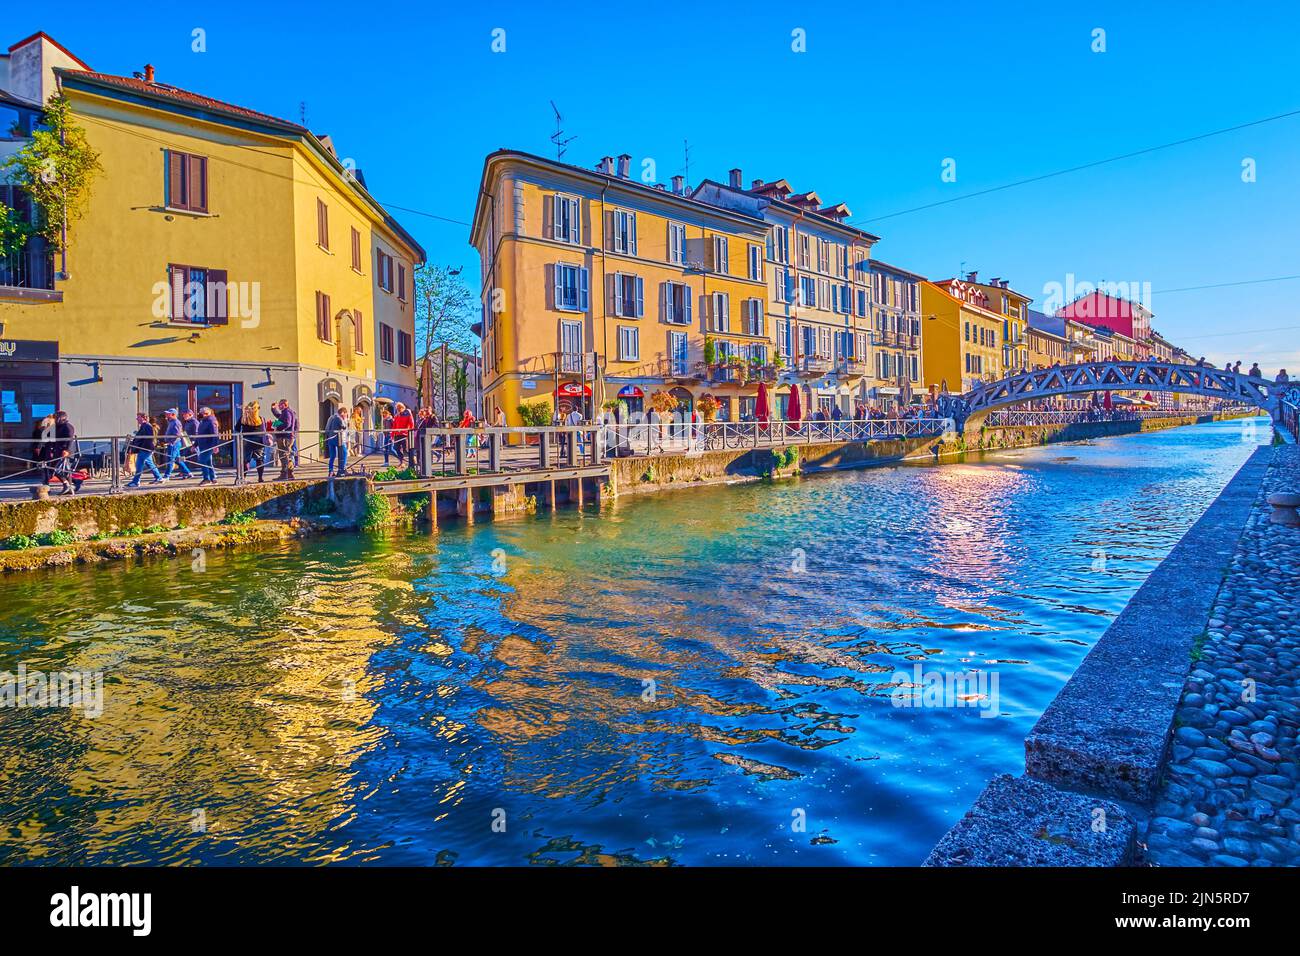 MILAN, ITALY - APRIL 9, 2022: Naviglio Grande Canal with historical houses become one of popular spots of nightlife, on April 9 in Milan, Italy Stock Photo